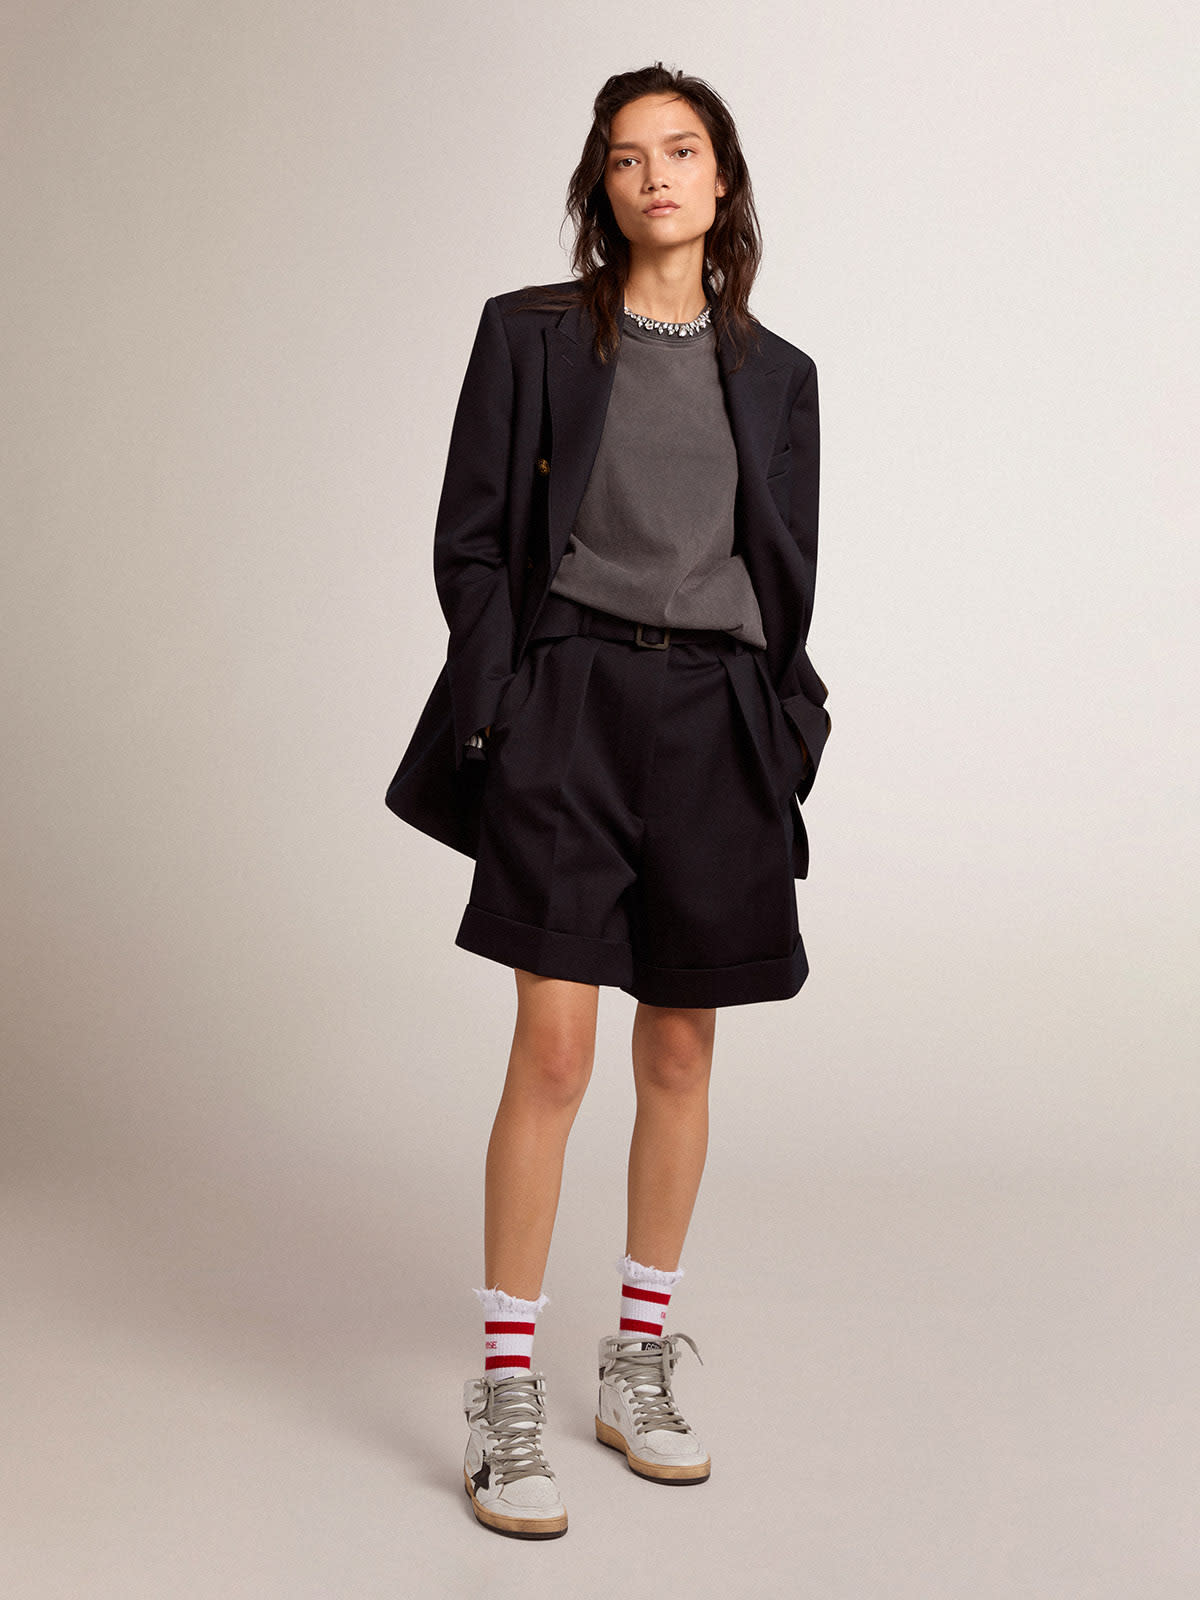 Golden Goose - Golden Collection shorts in black wool gabardine with belt at the waist in 